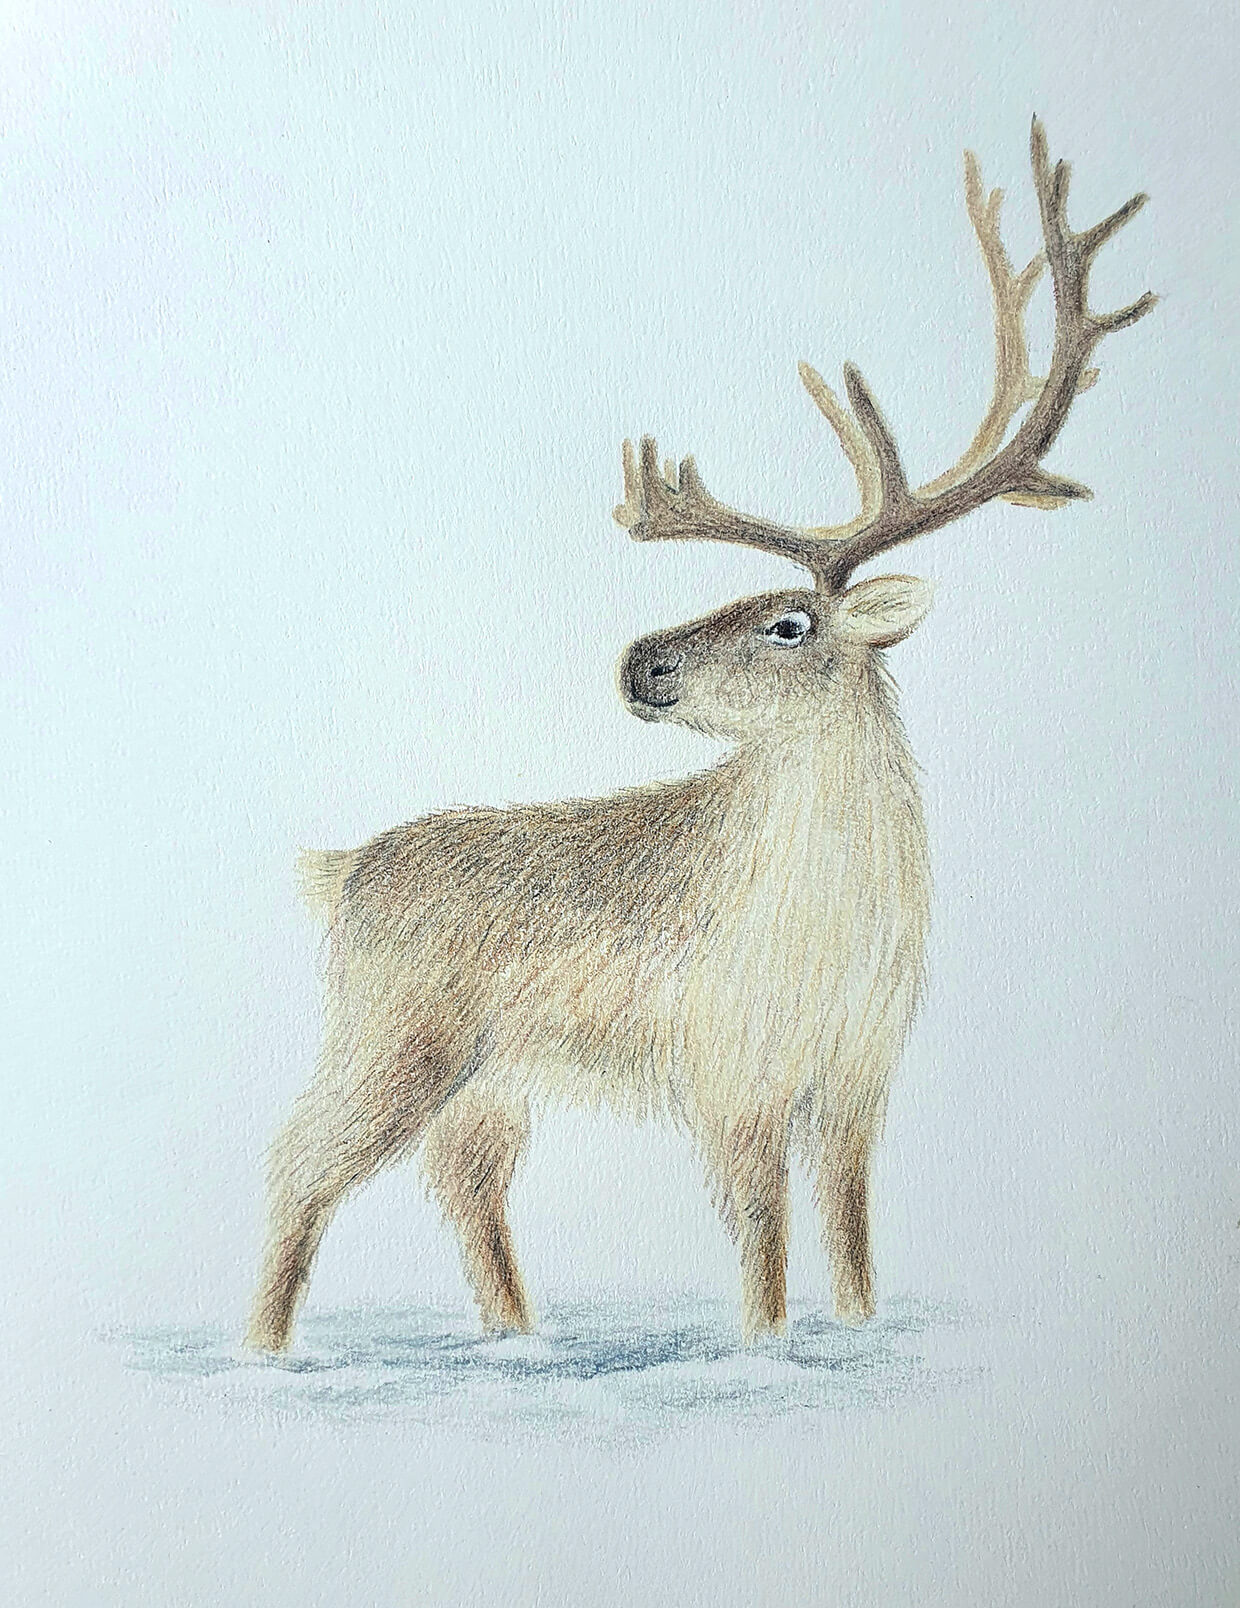 How to draw a reindeer - simple step by step instruction for kids